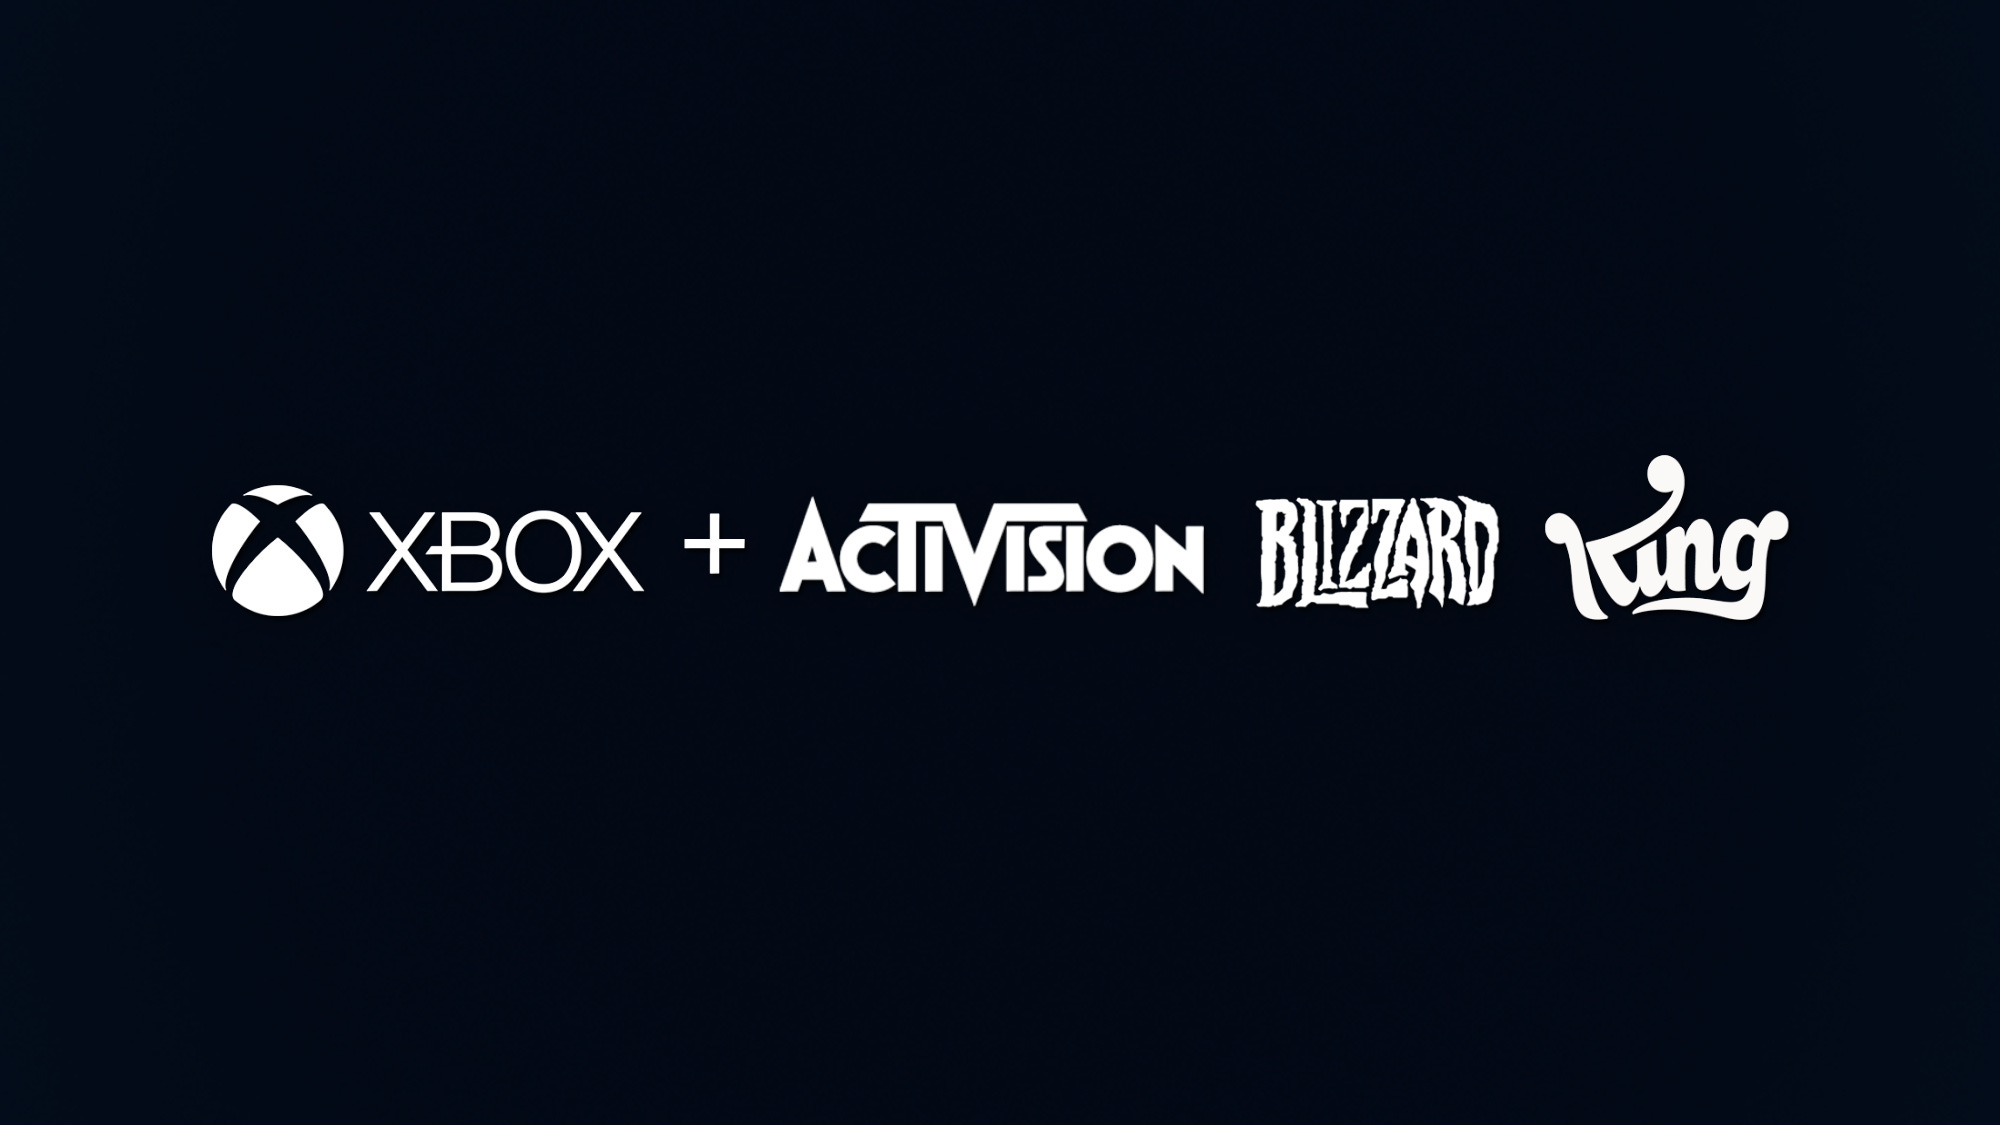 Logos of Xbox plus Activision, Blizzard, and King